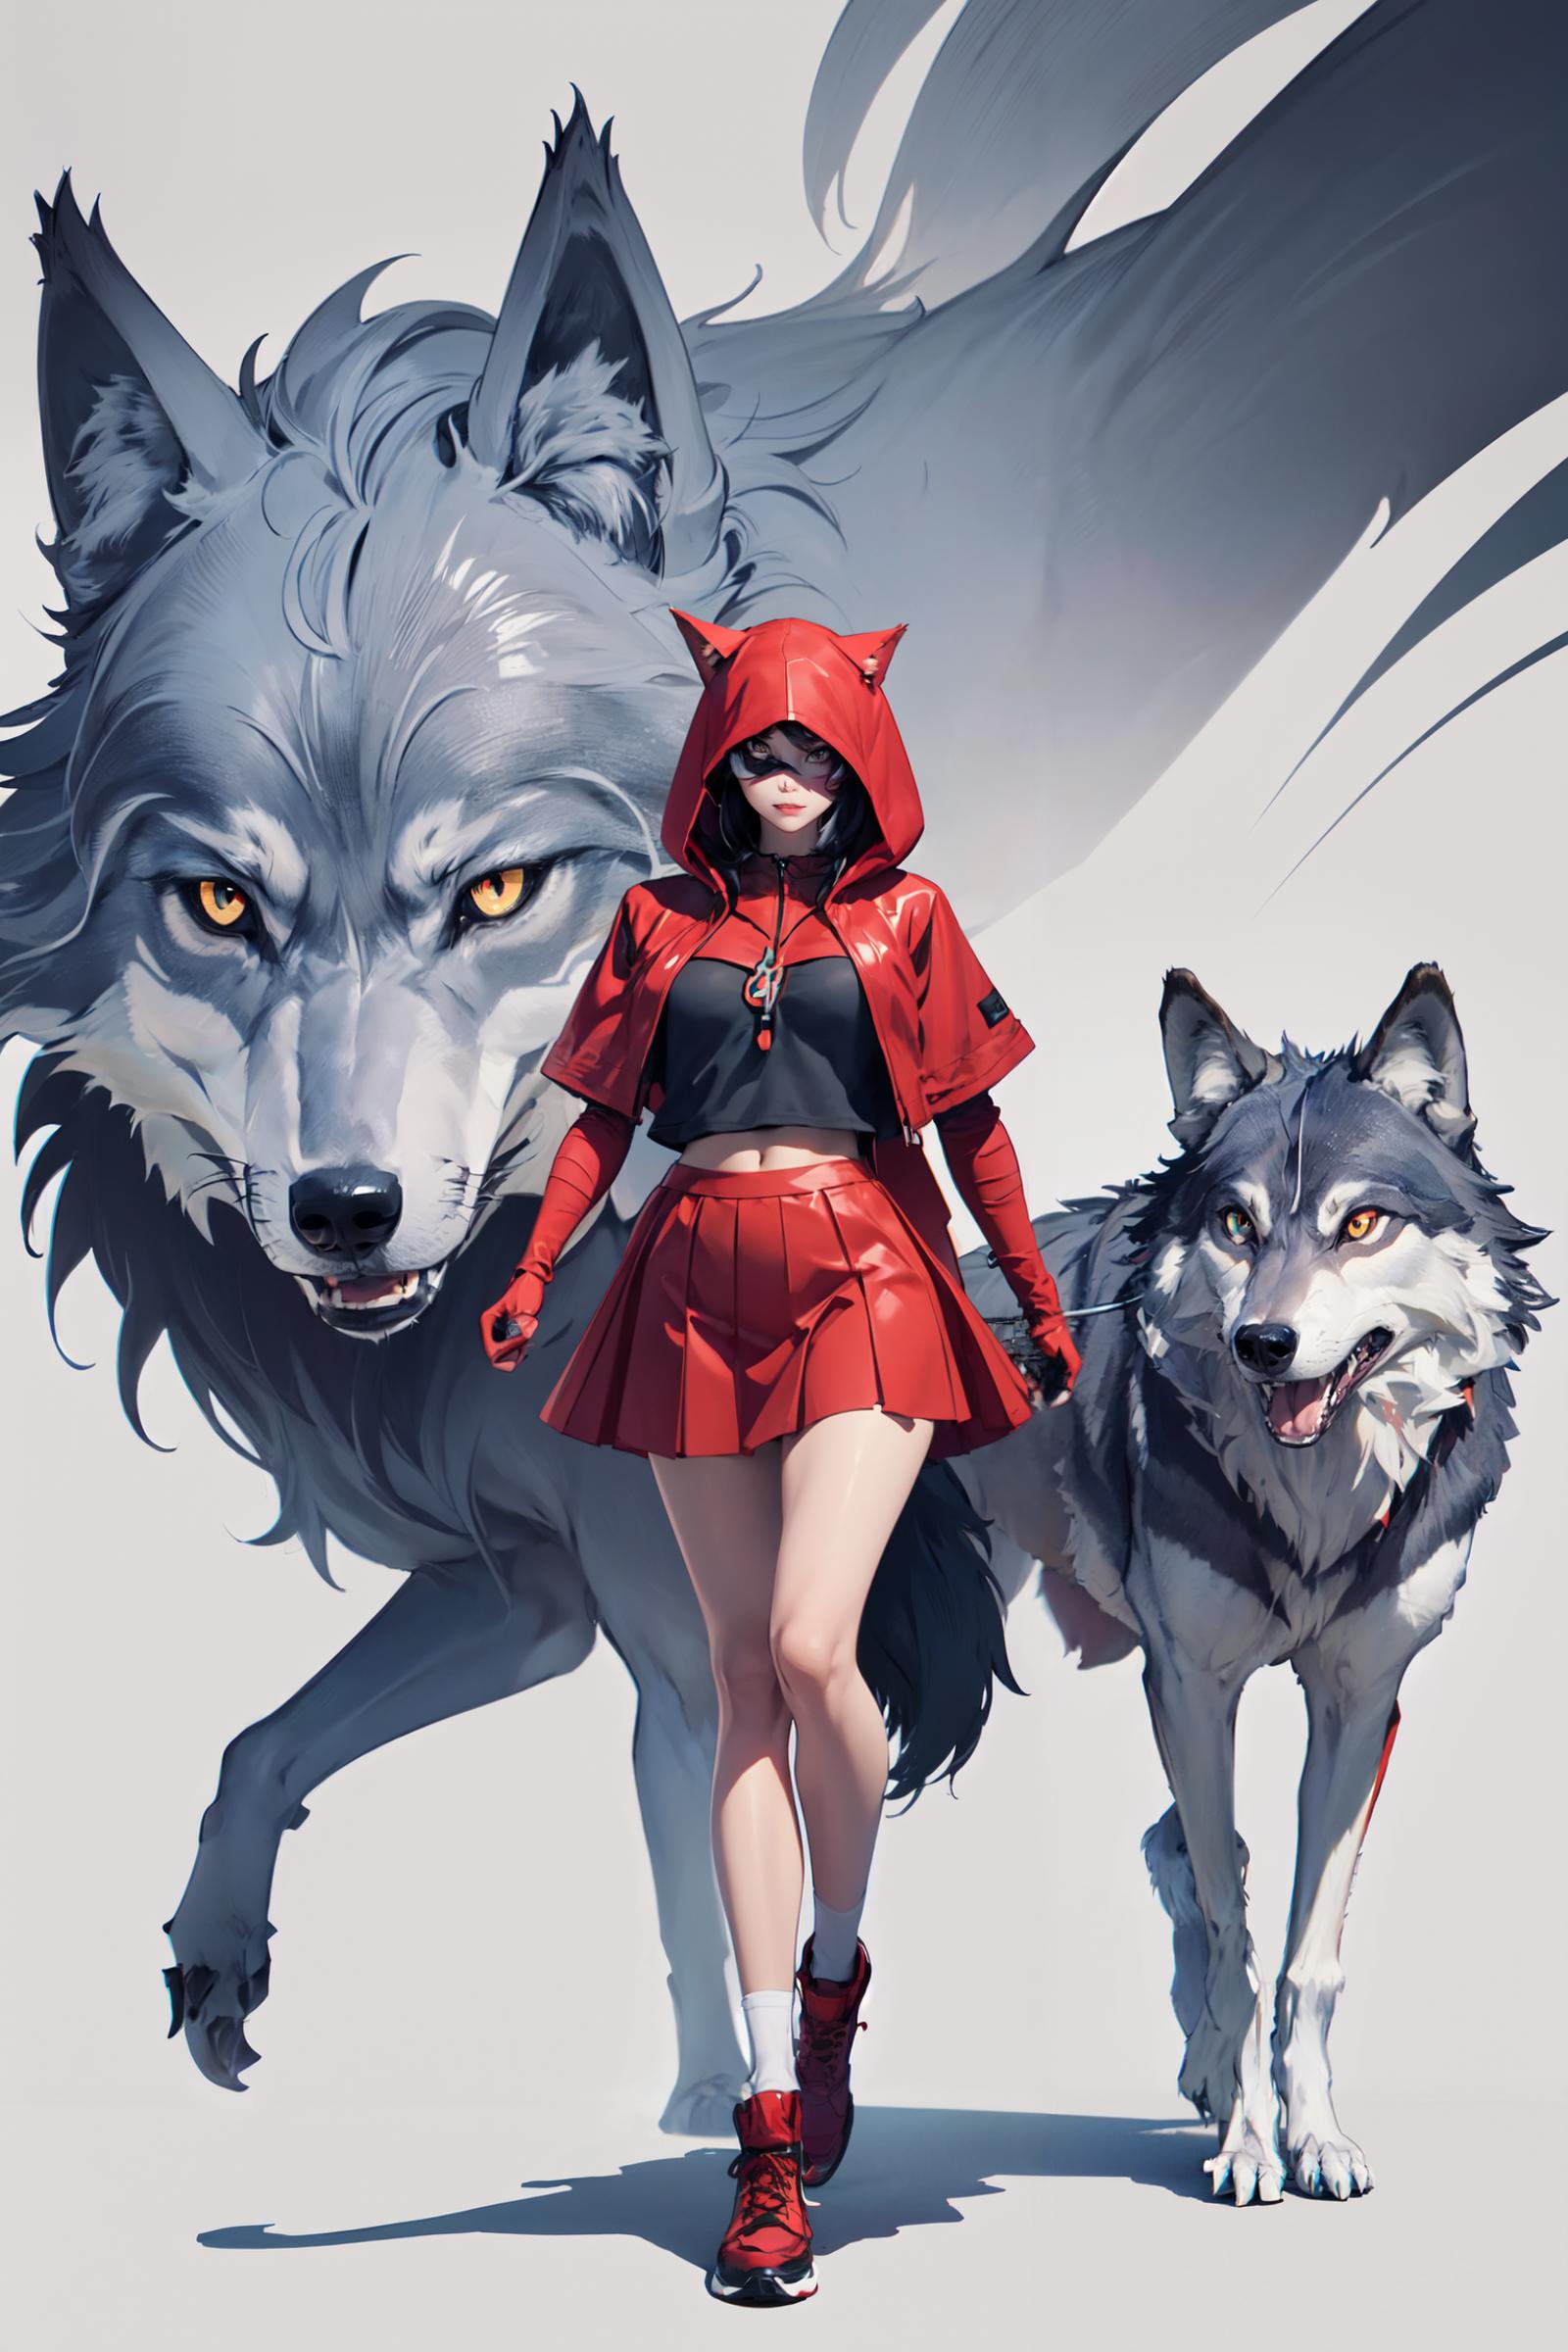 Sexy Little Red Riding Hood outfit|情趣内衣:小红帽疯狂抽插狼先生款 image by shigato